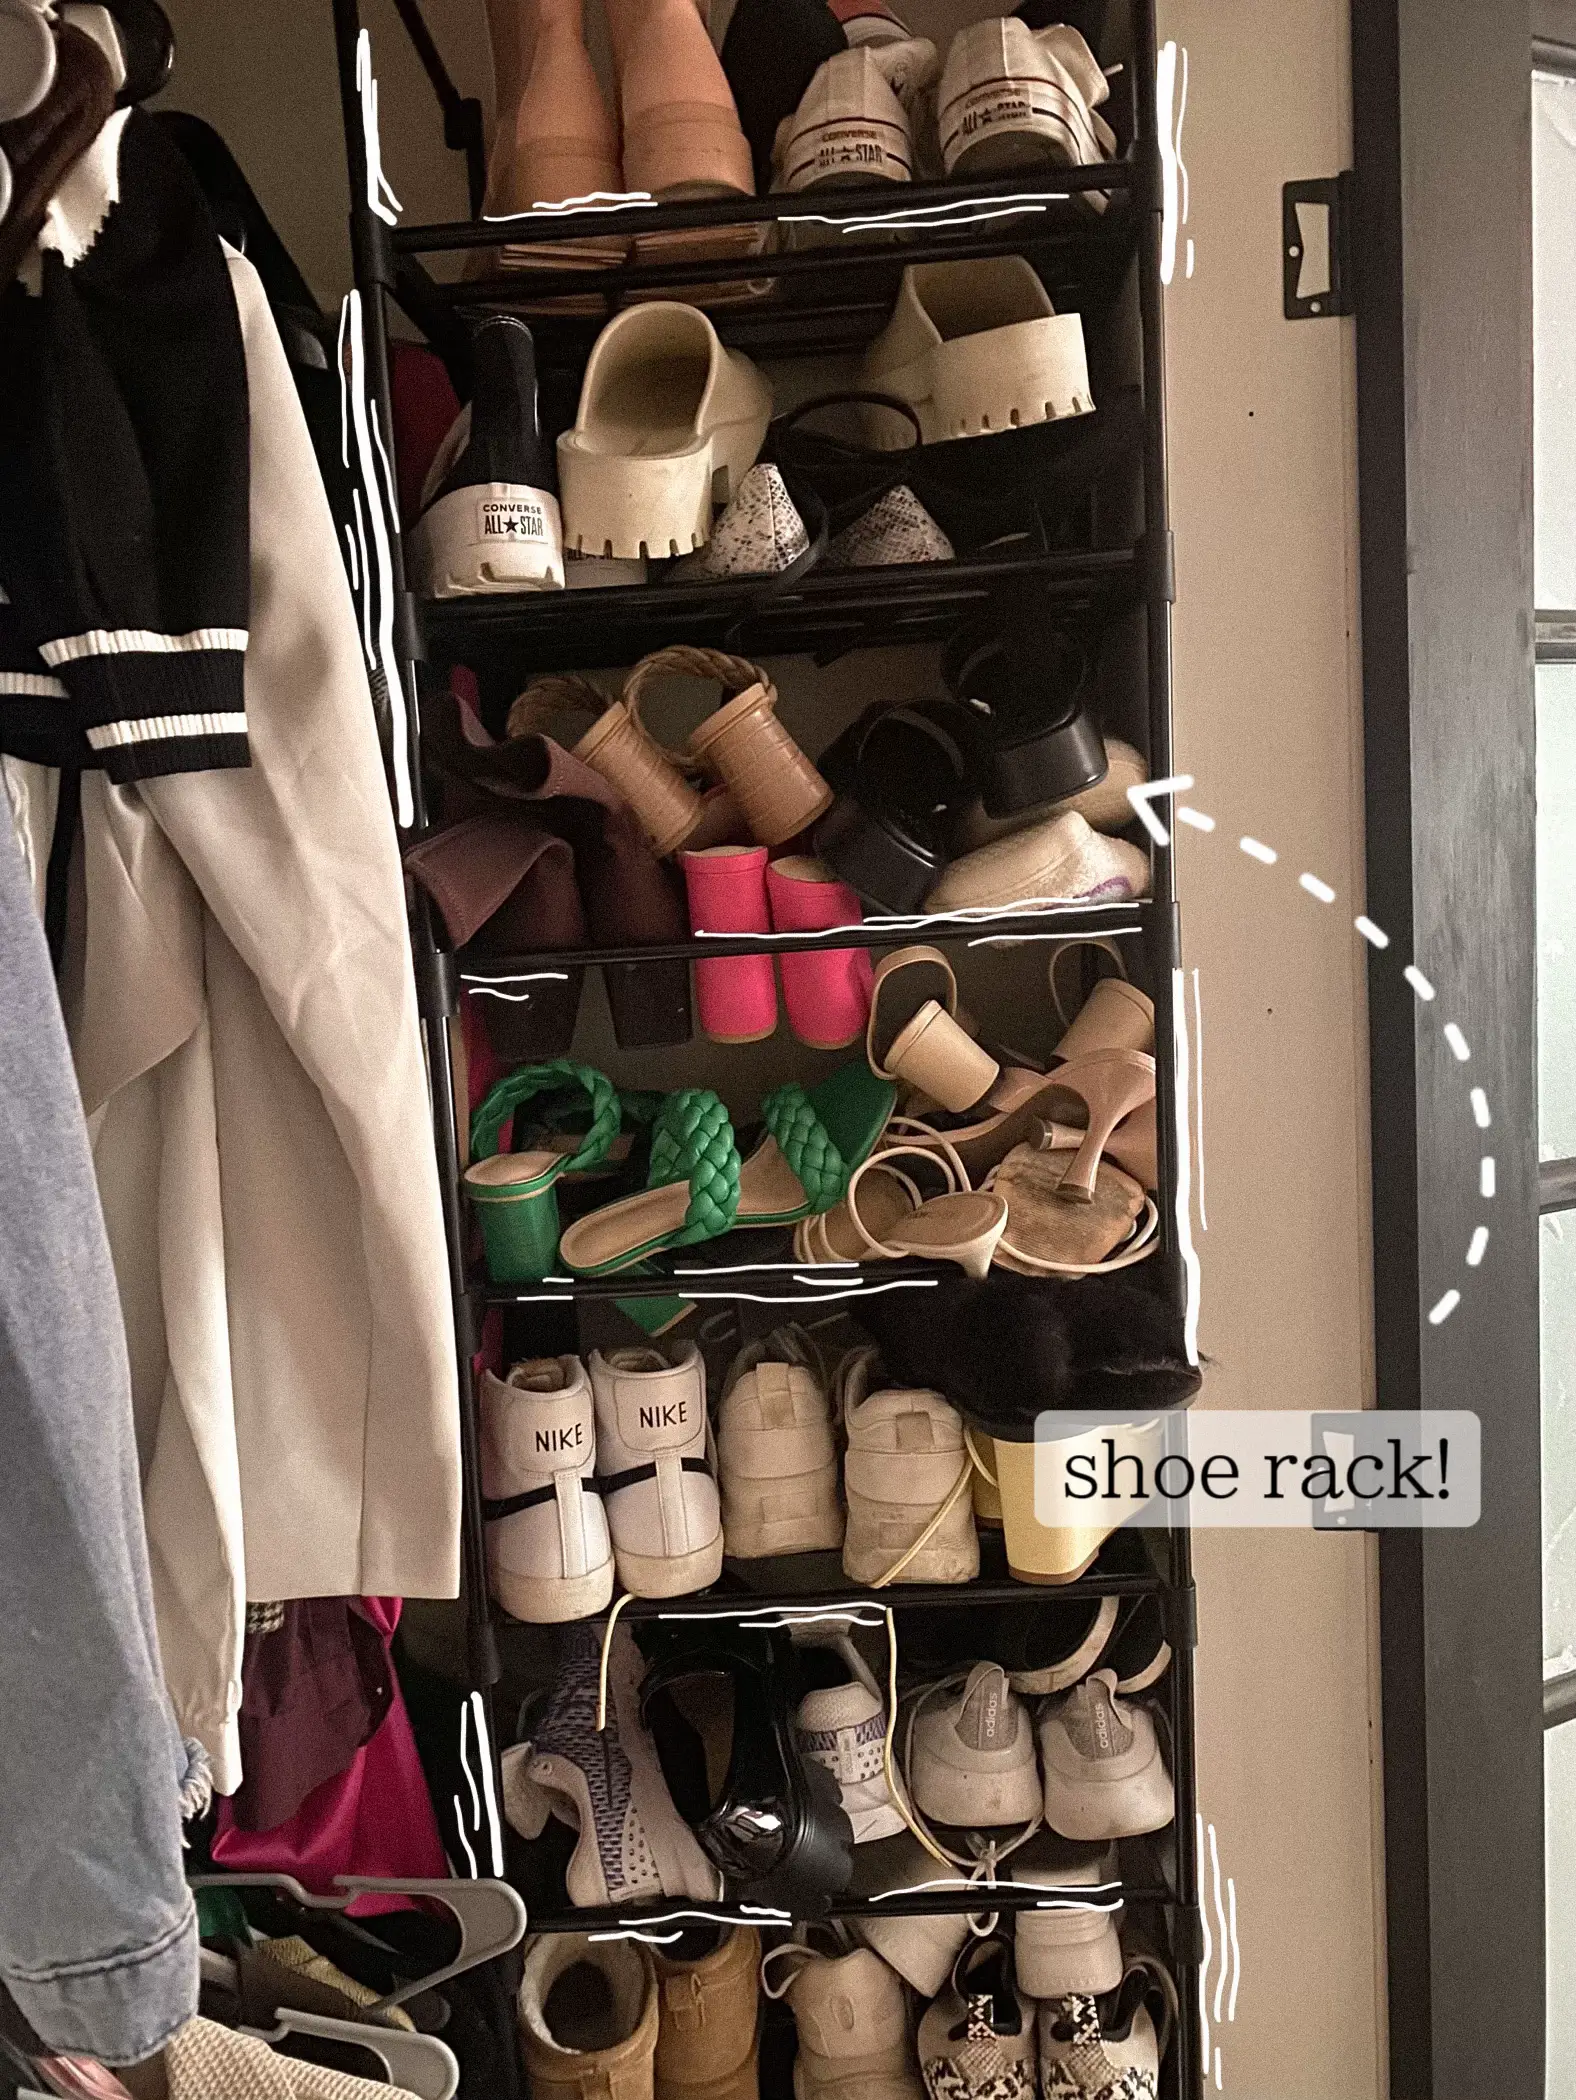 My ADHD life hack: put a clear shoe organizer in the bathroom for